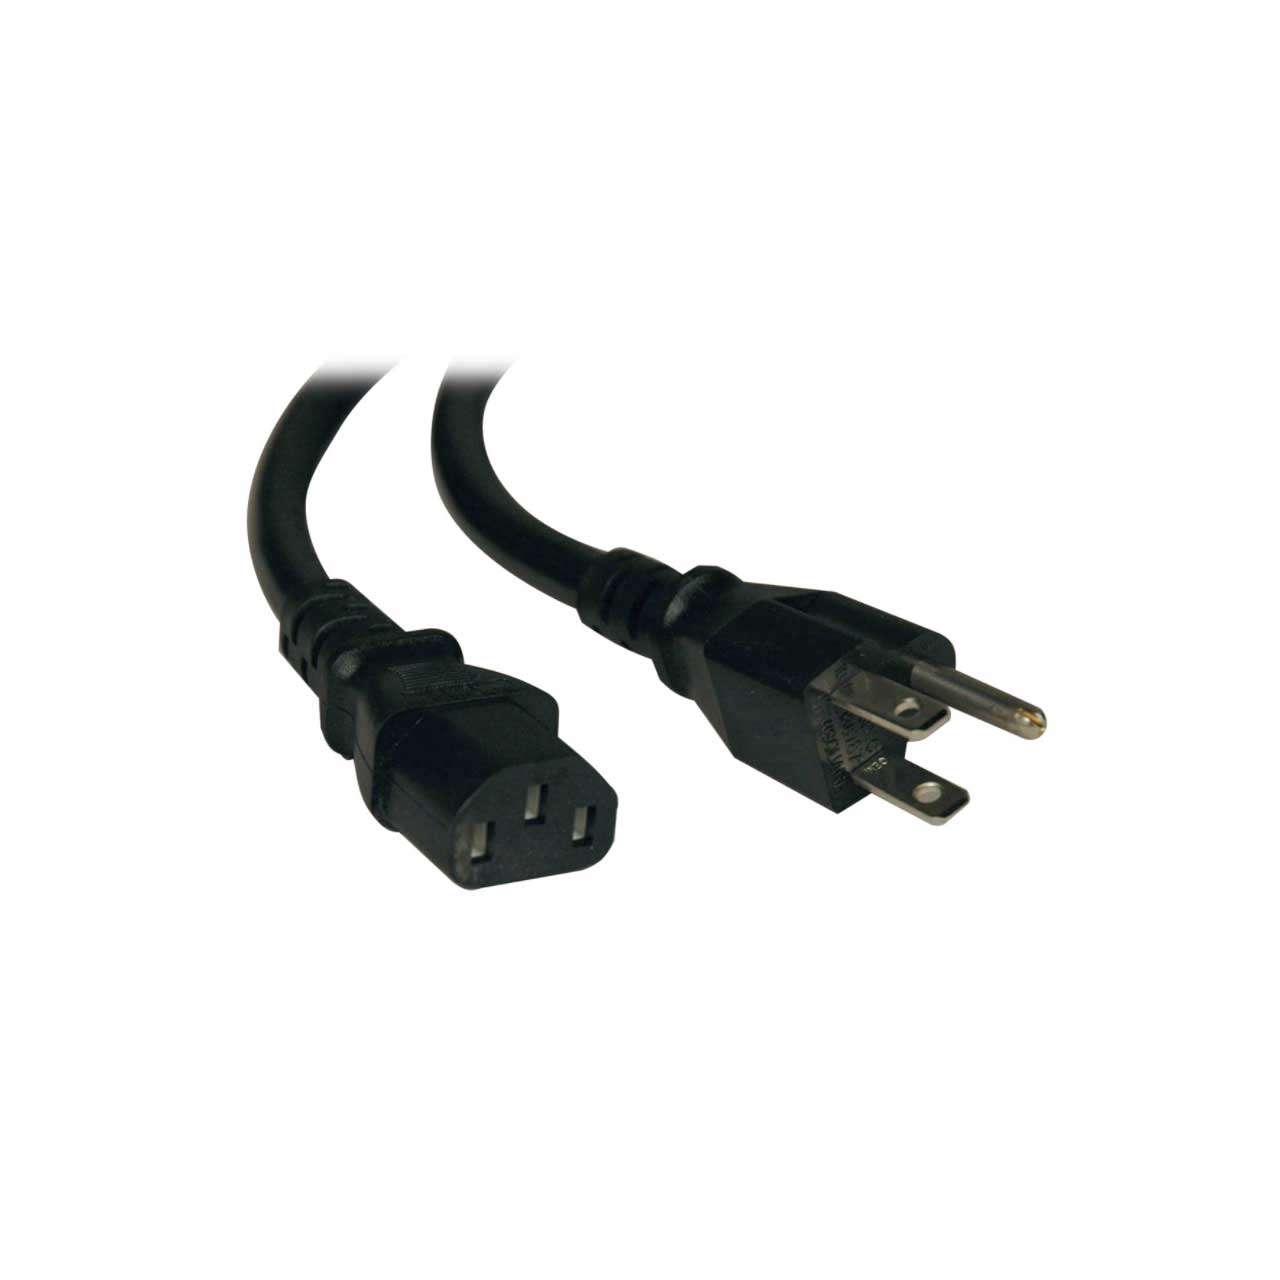 5 Pcs IEC Male to Edison Style Female AC Power Cord Adapter 